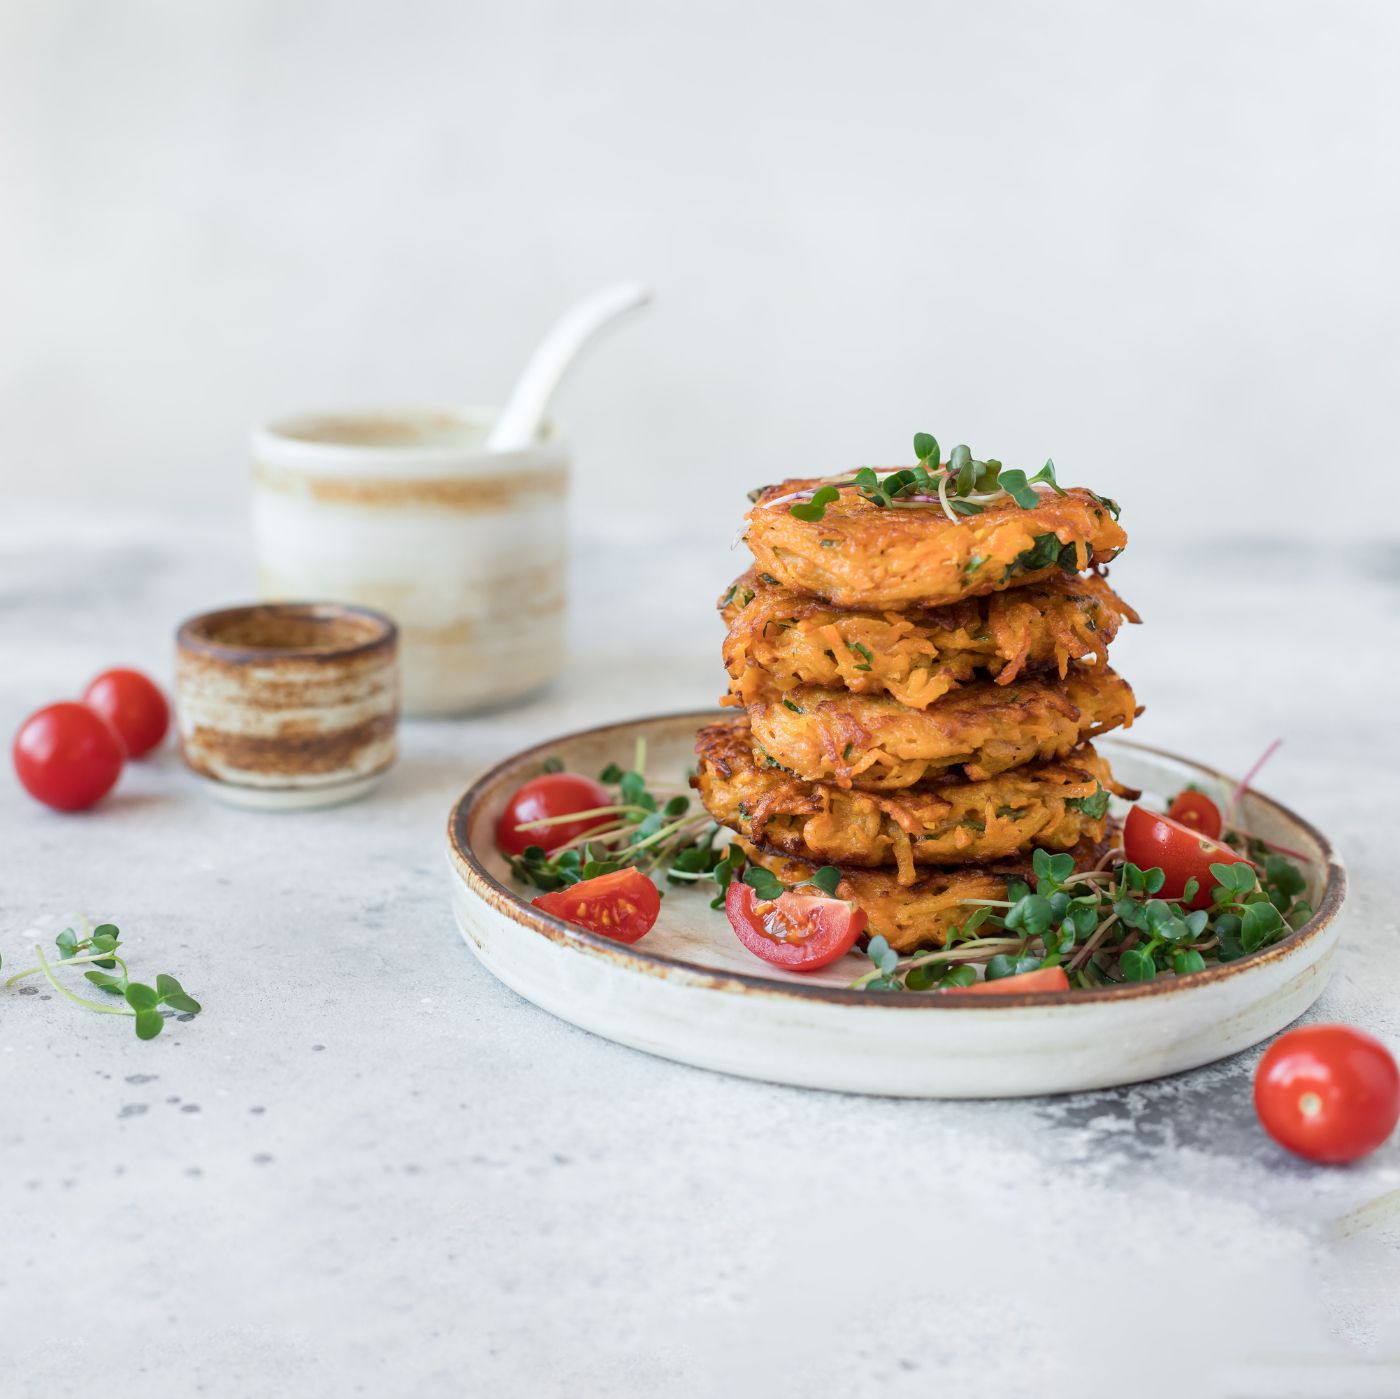 sweet-potato-fritters-served-on-ceramic-plate-1364915438_2125x1416 square.jpeg